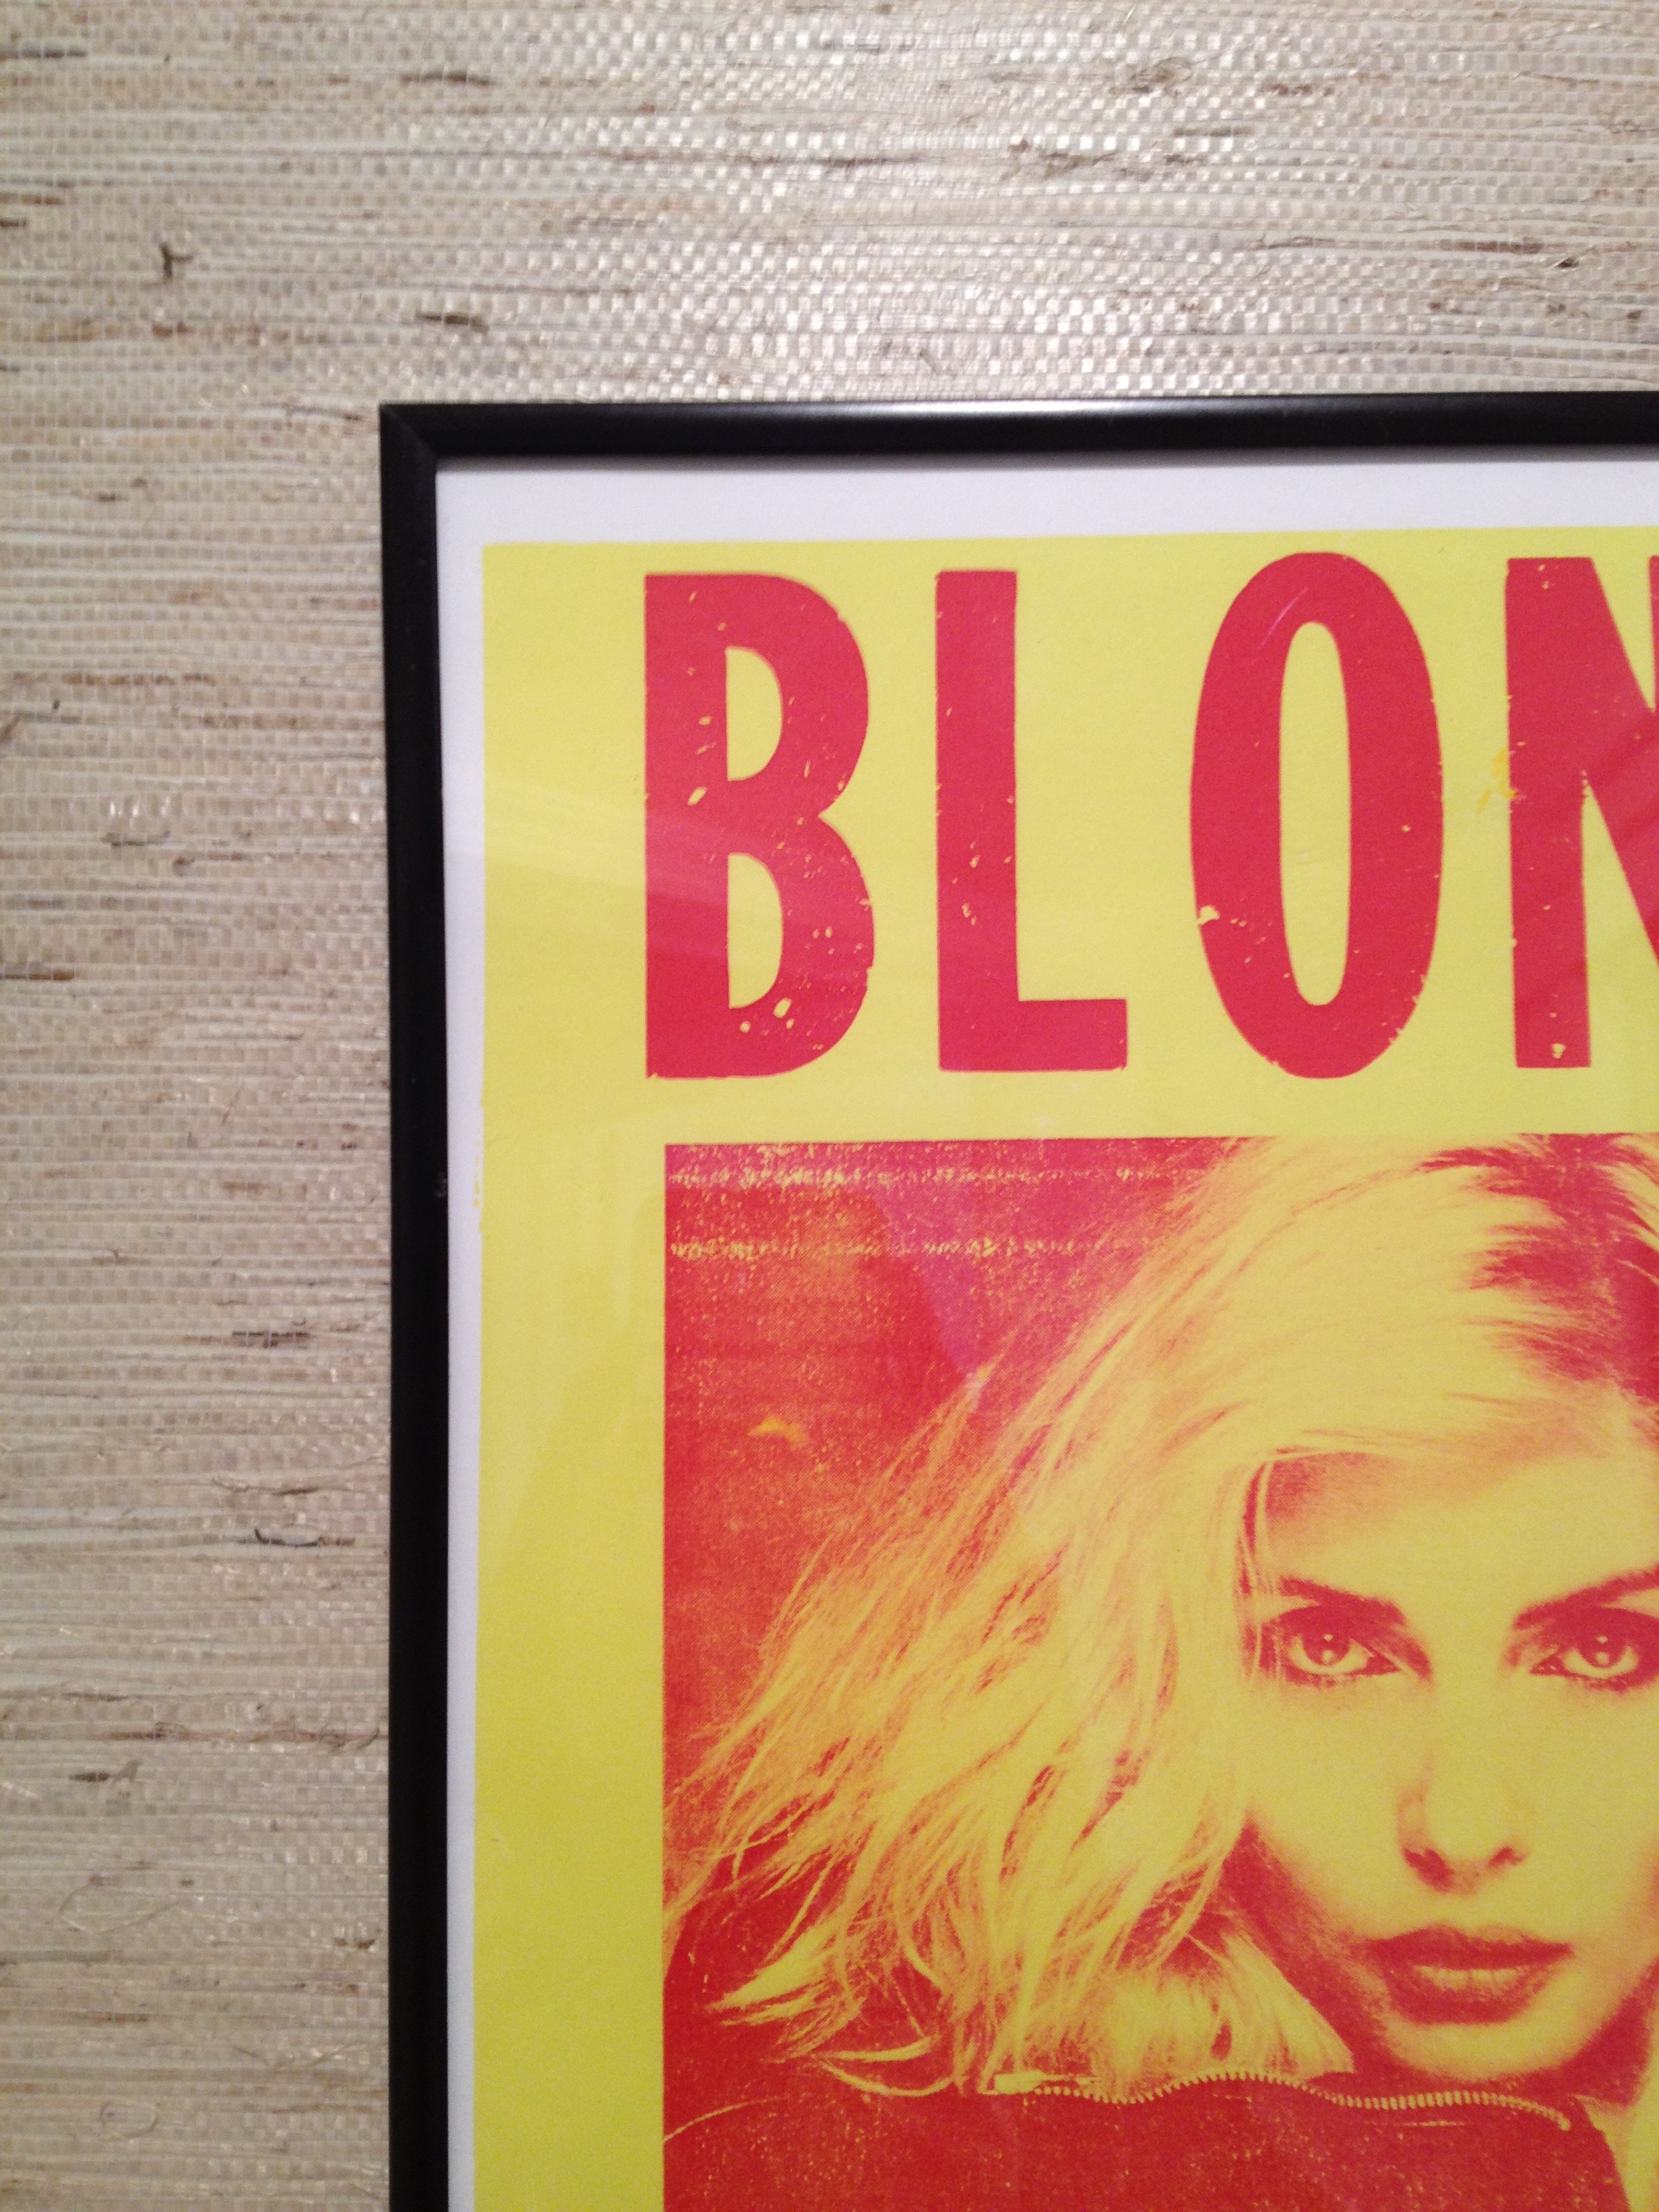 Blondie poster against the grass cloth wallpaper in bathroom